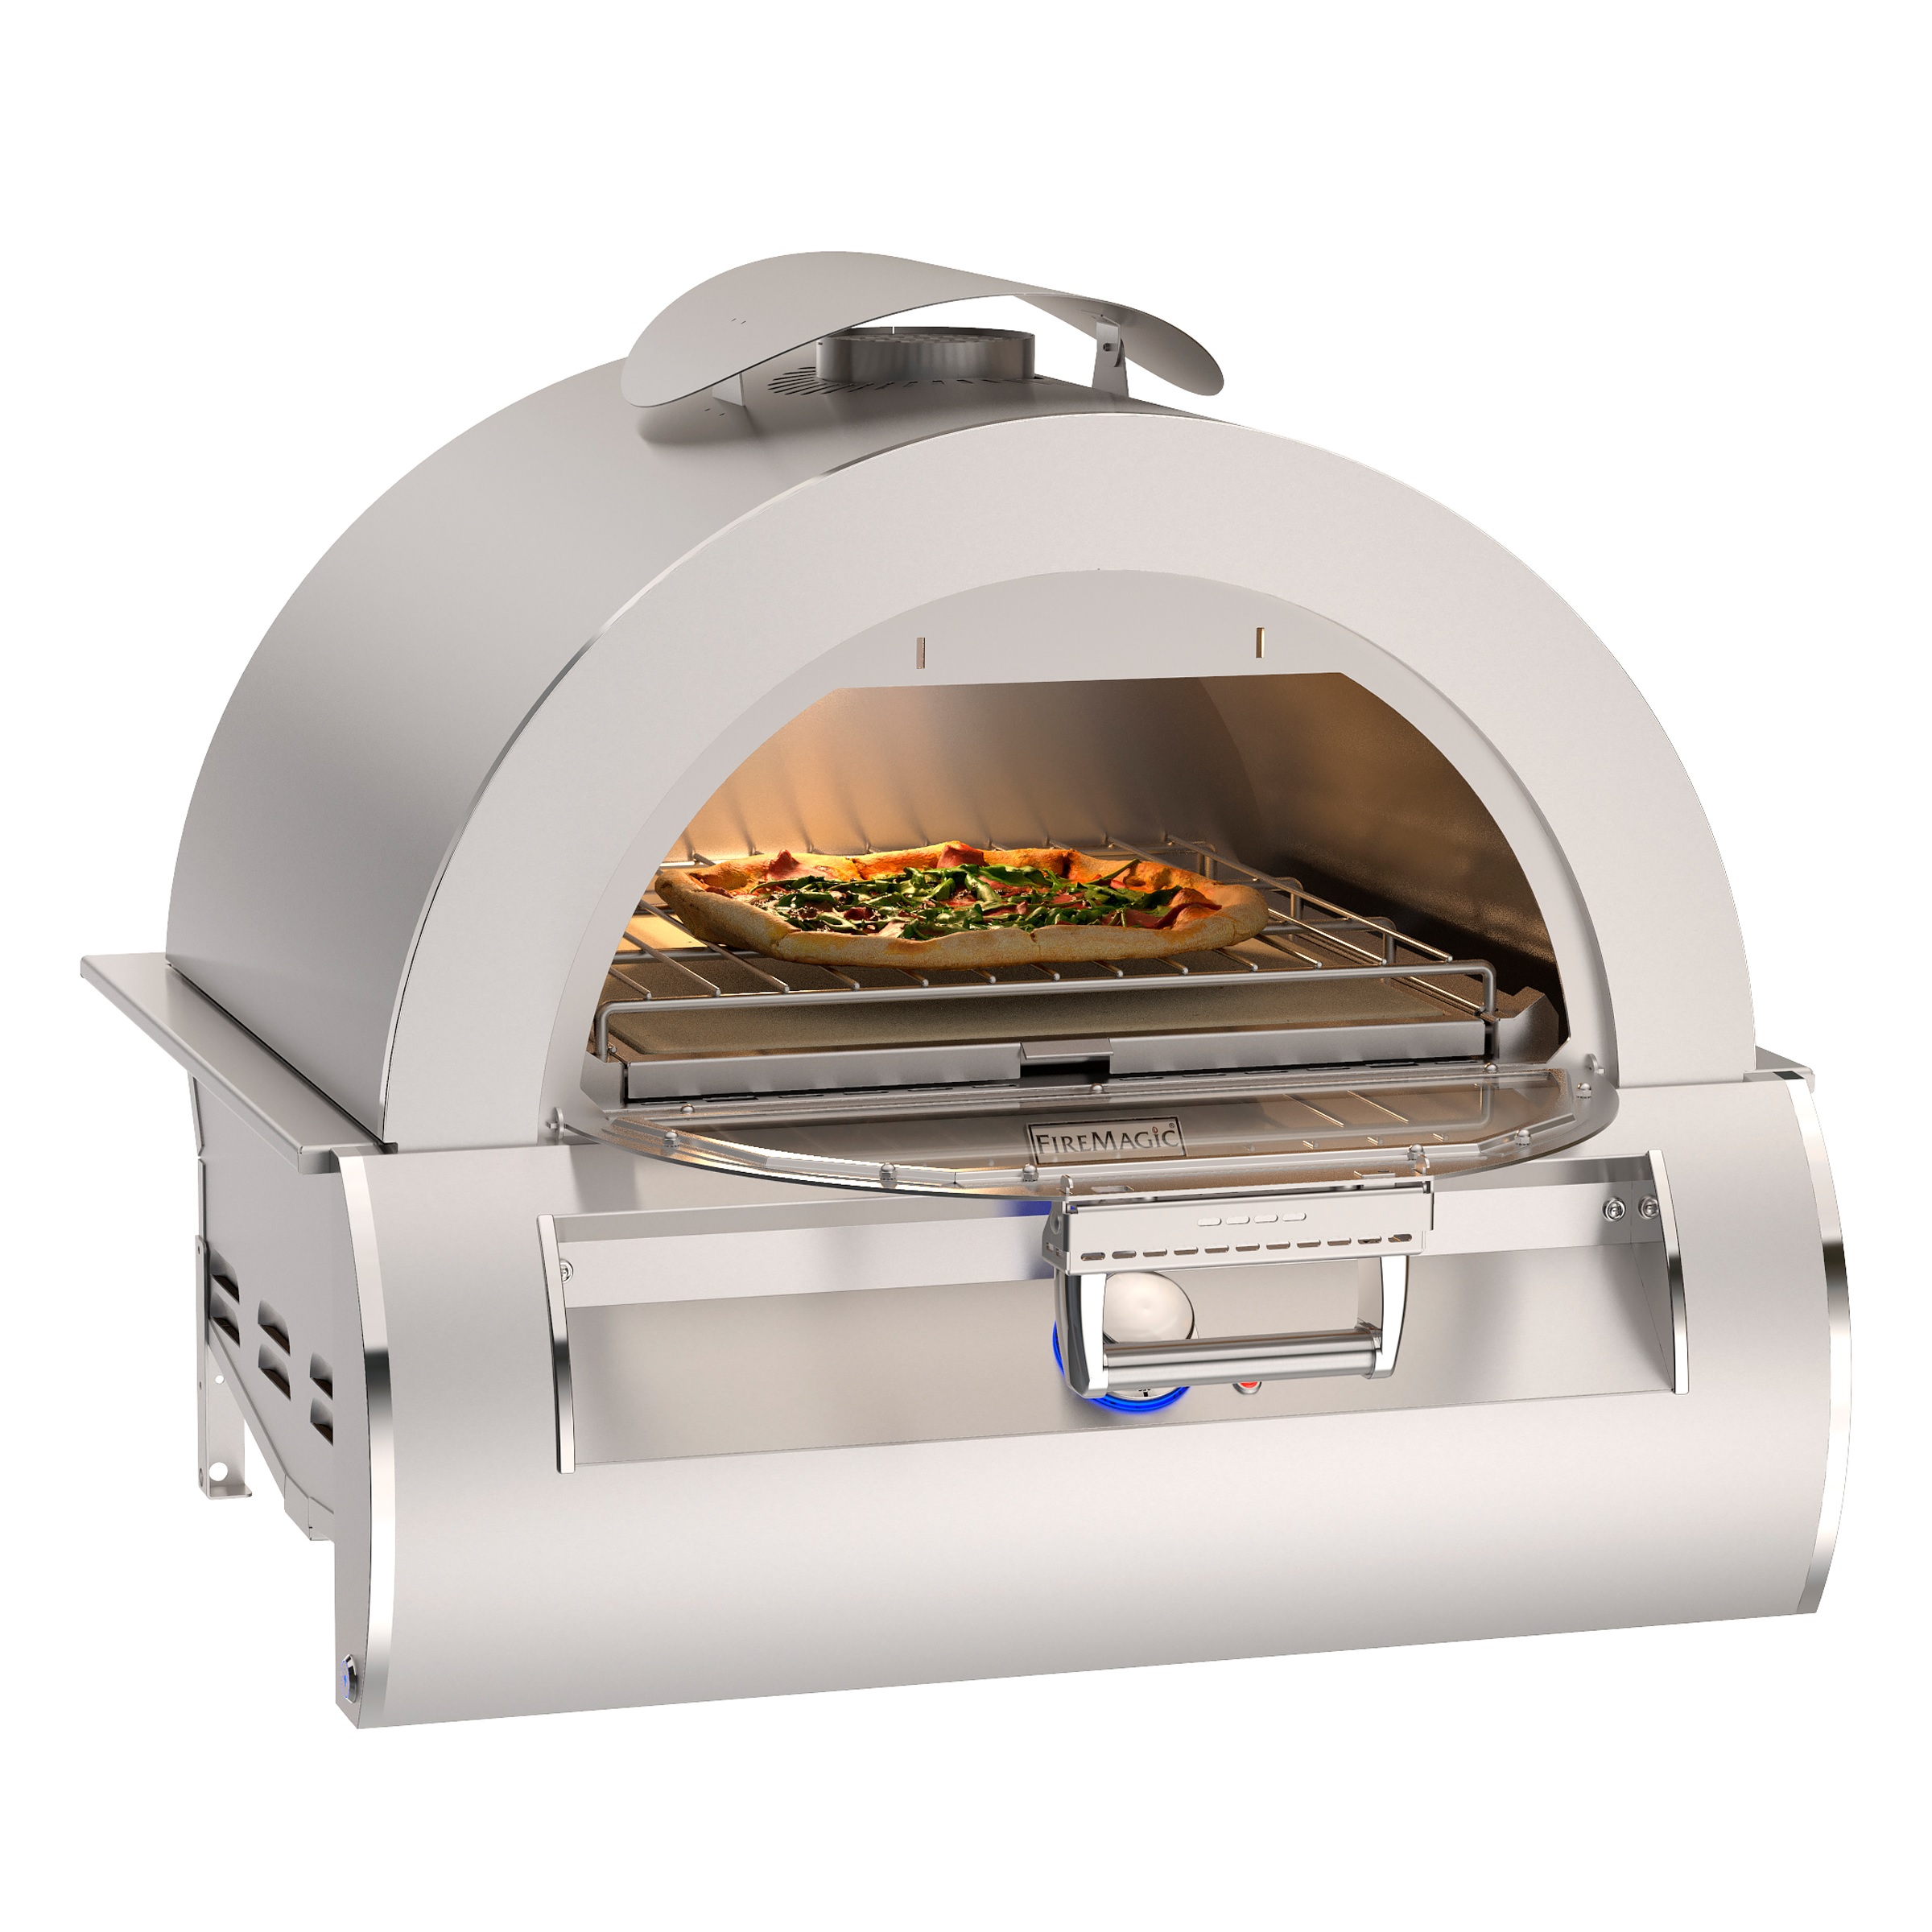 echelon built-in gas pizza oven product image